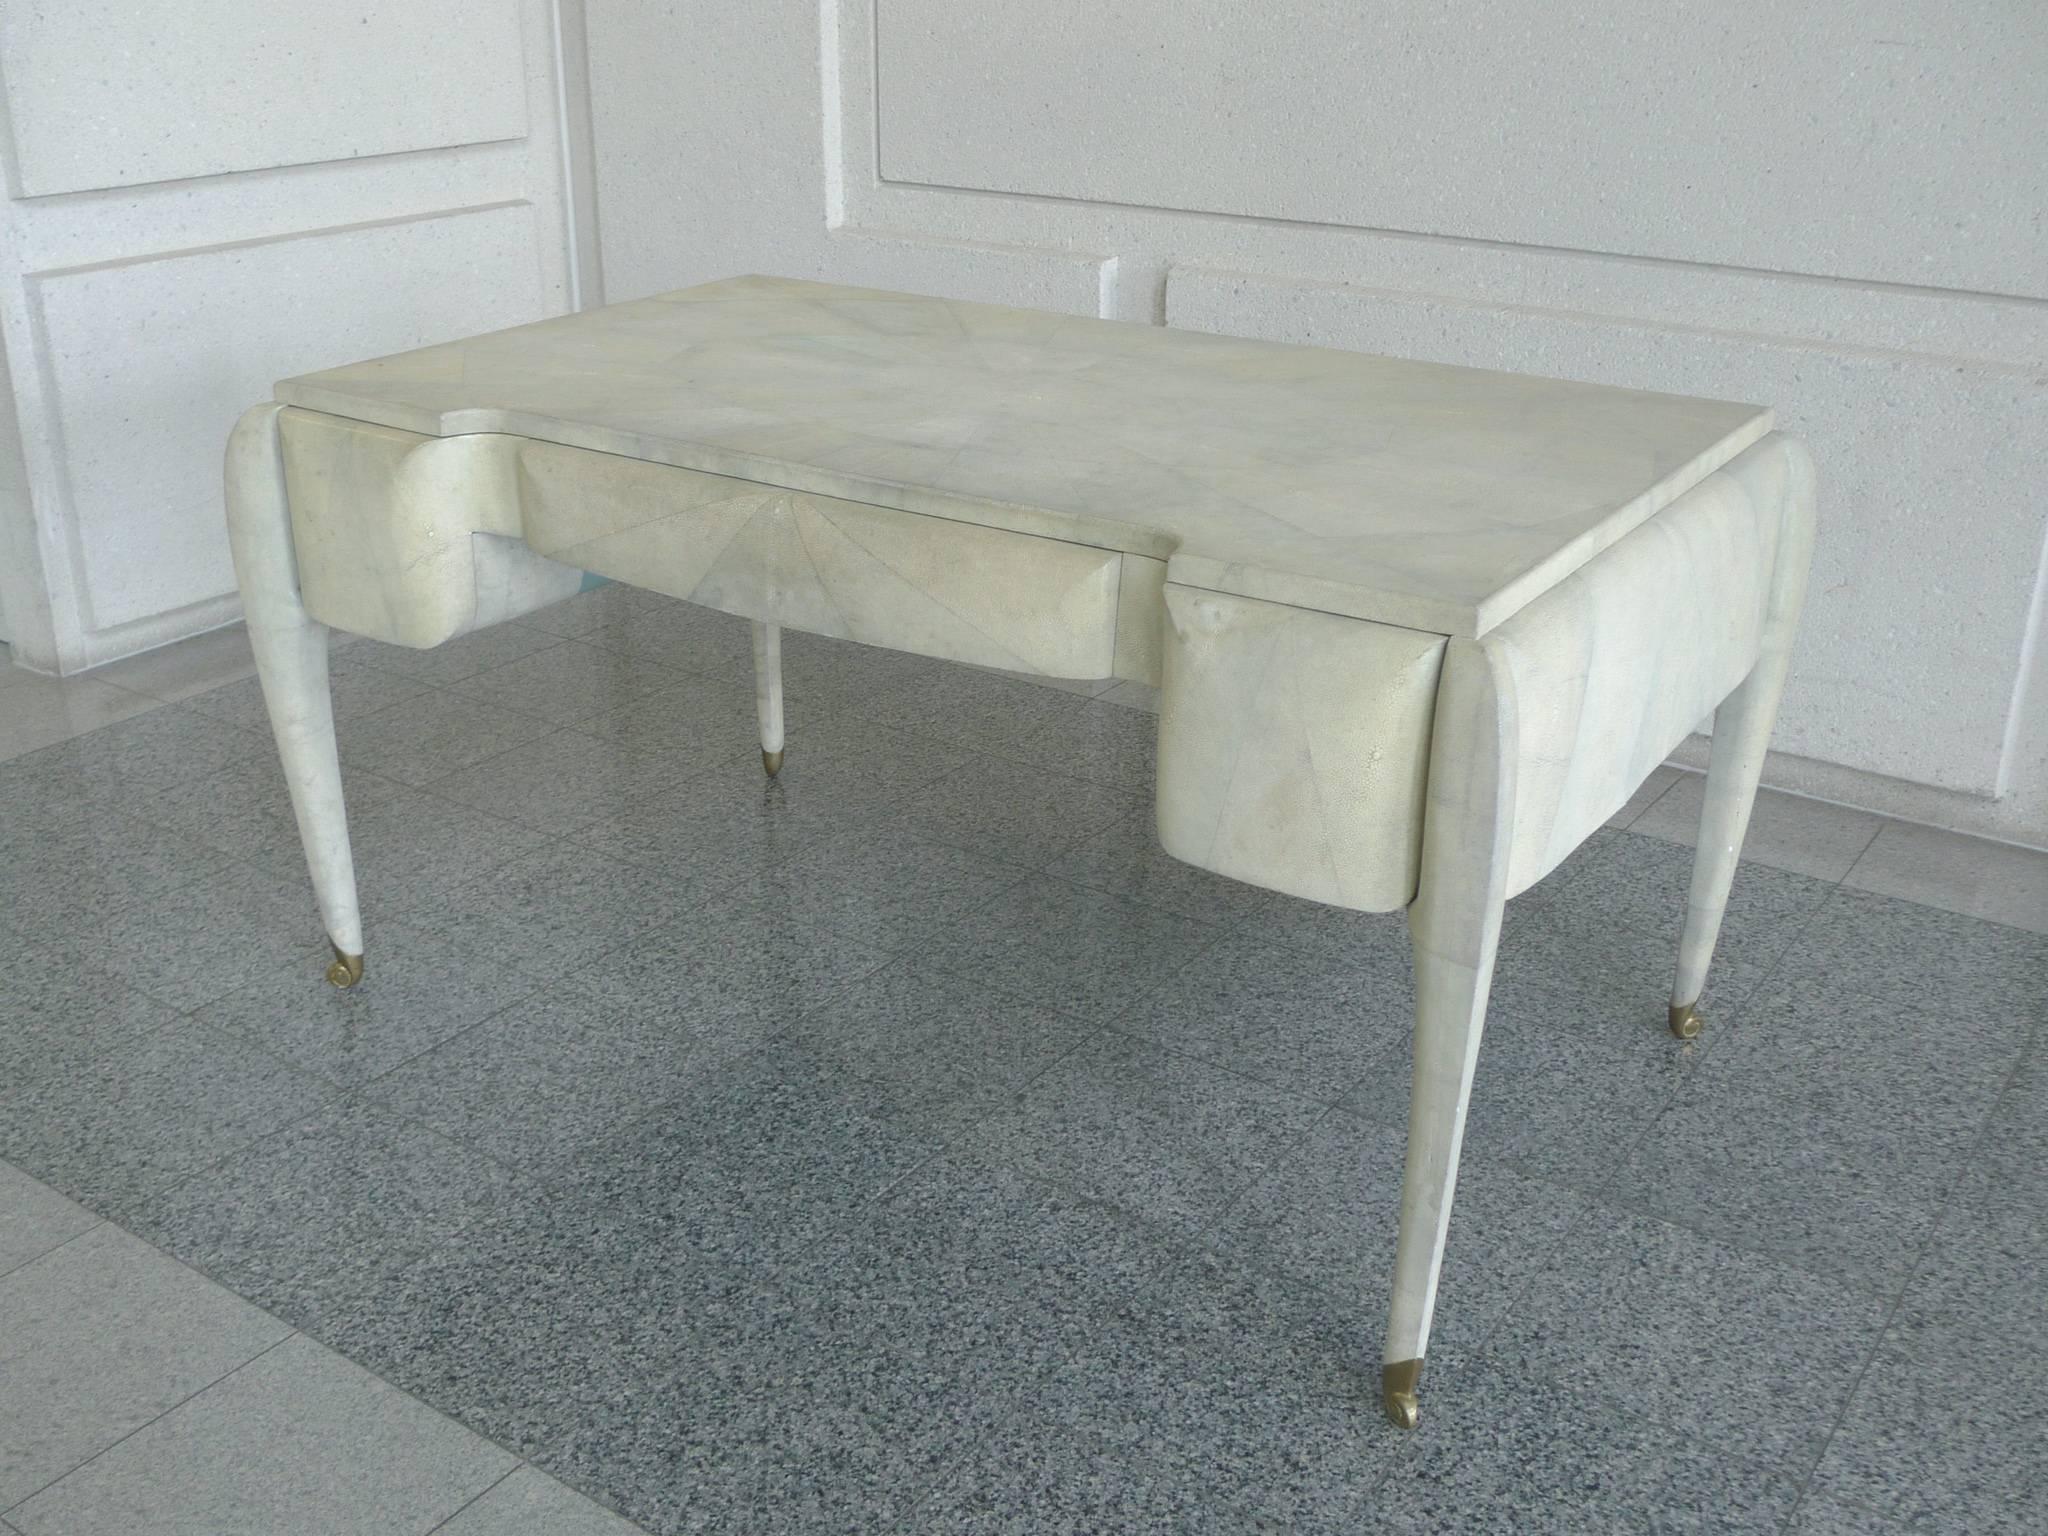 This outstanding Art Deco style desk is crafted by Maitland-Smith. The company is well known for its use of unusual materials such as fossil stone and shagreen. This desk is beautifully covered with the latter. The shagreen is arranged in a